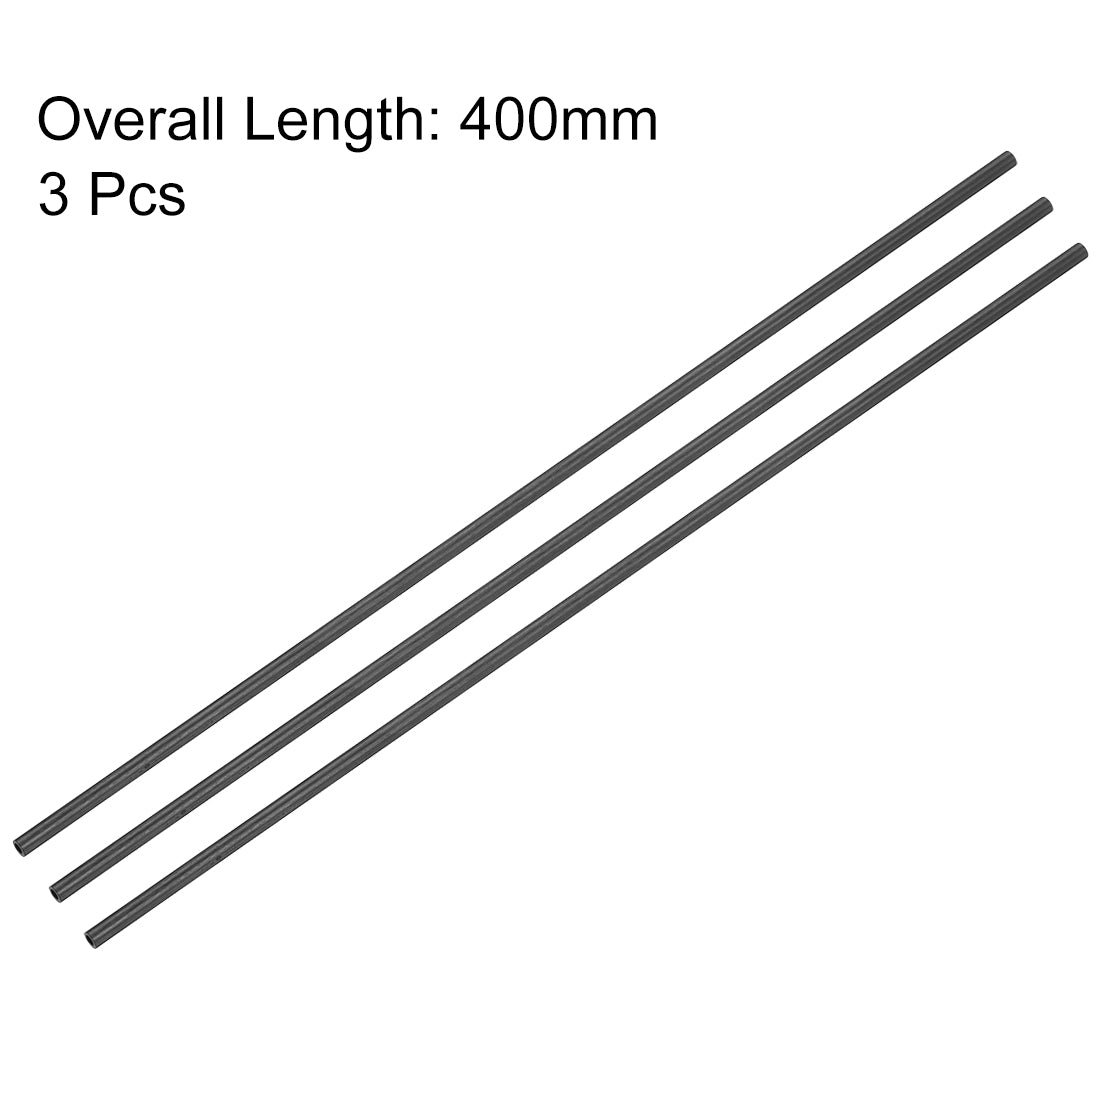 uxcell Uxcell Carbon Fiber Round Tube 3mm x 2mm x 400mm Carbon Fiber Wing Pultrusion Tubing for RC Airplane Quadcopter 3 Pcs